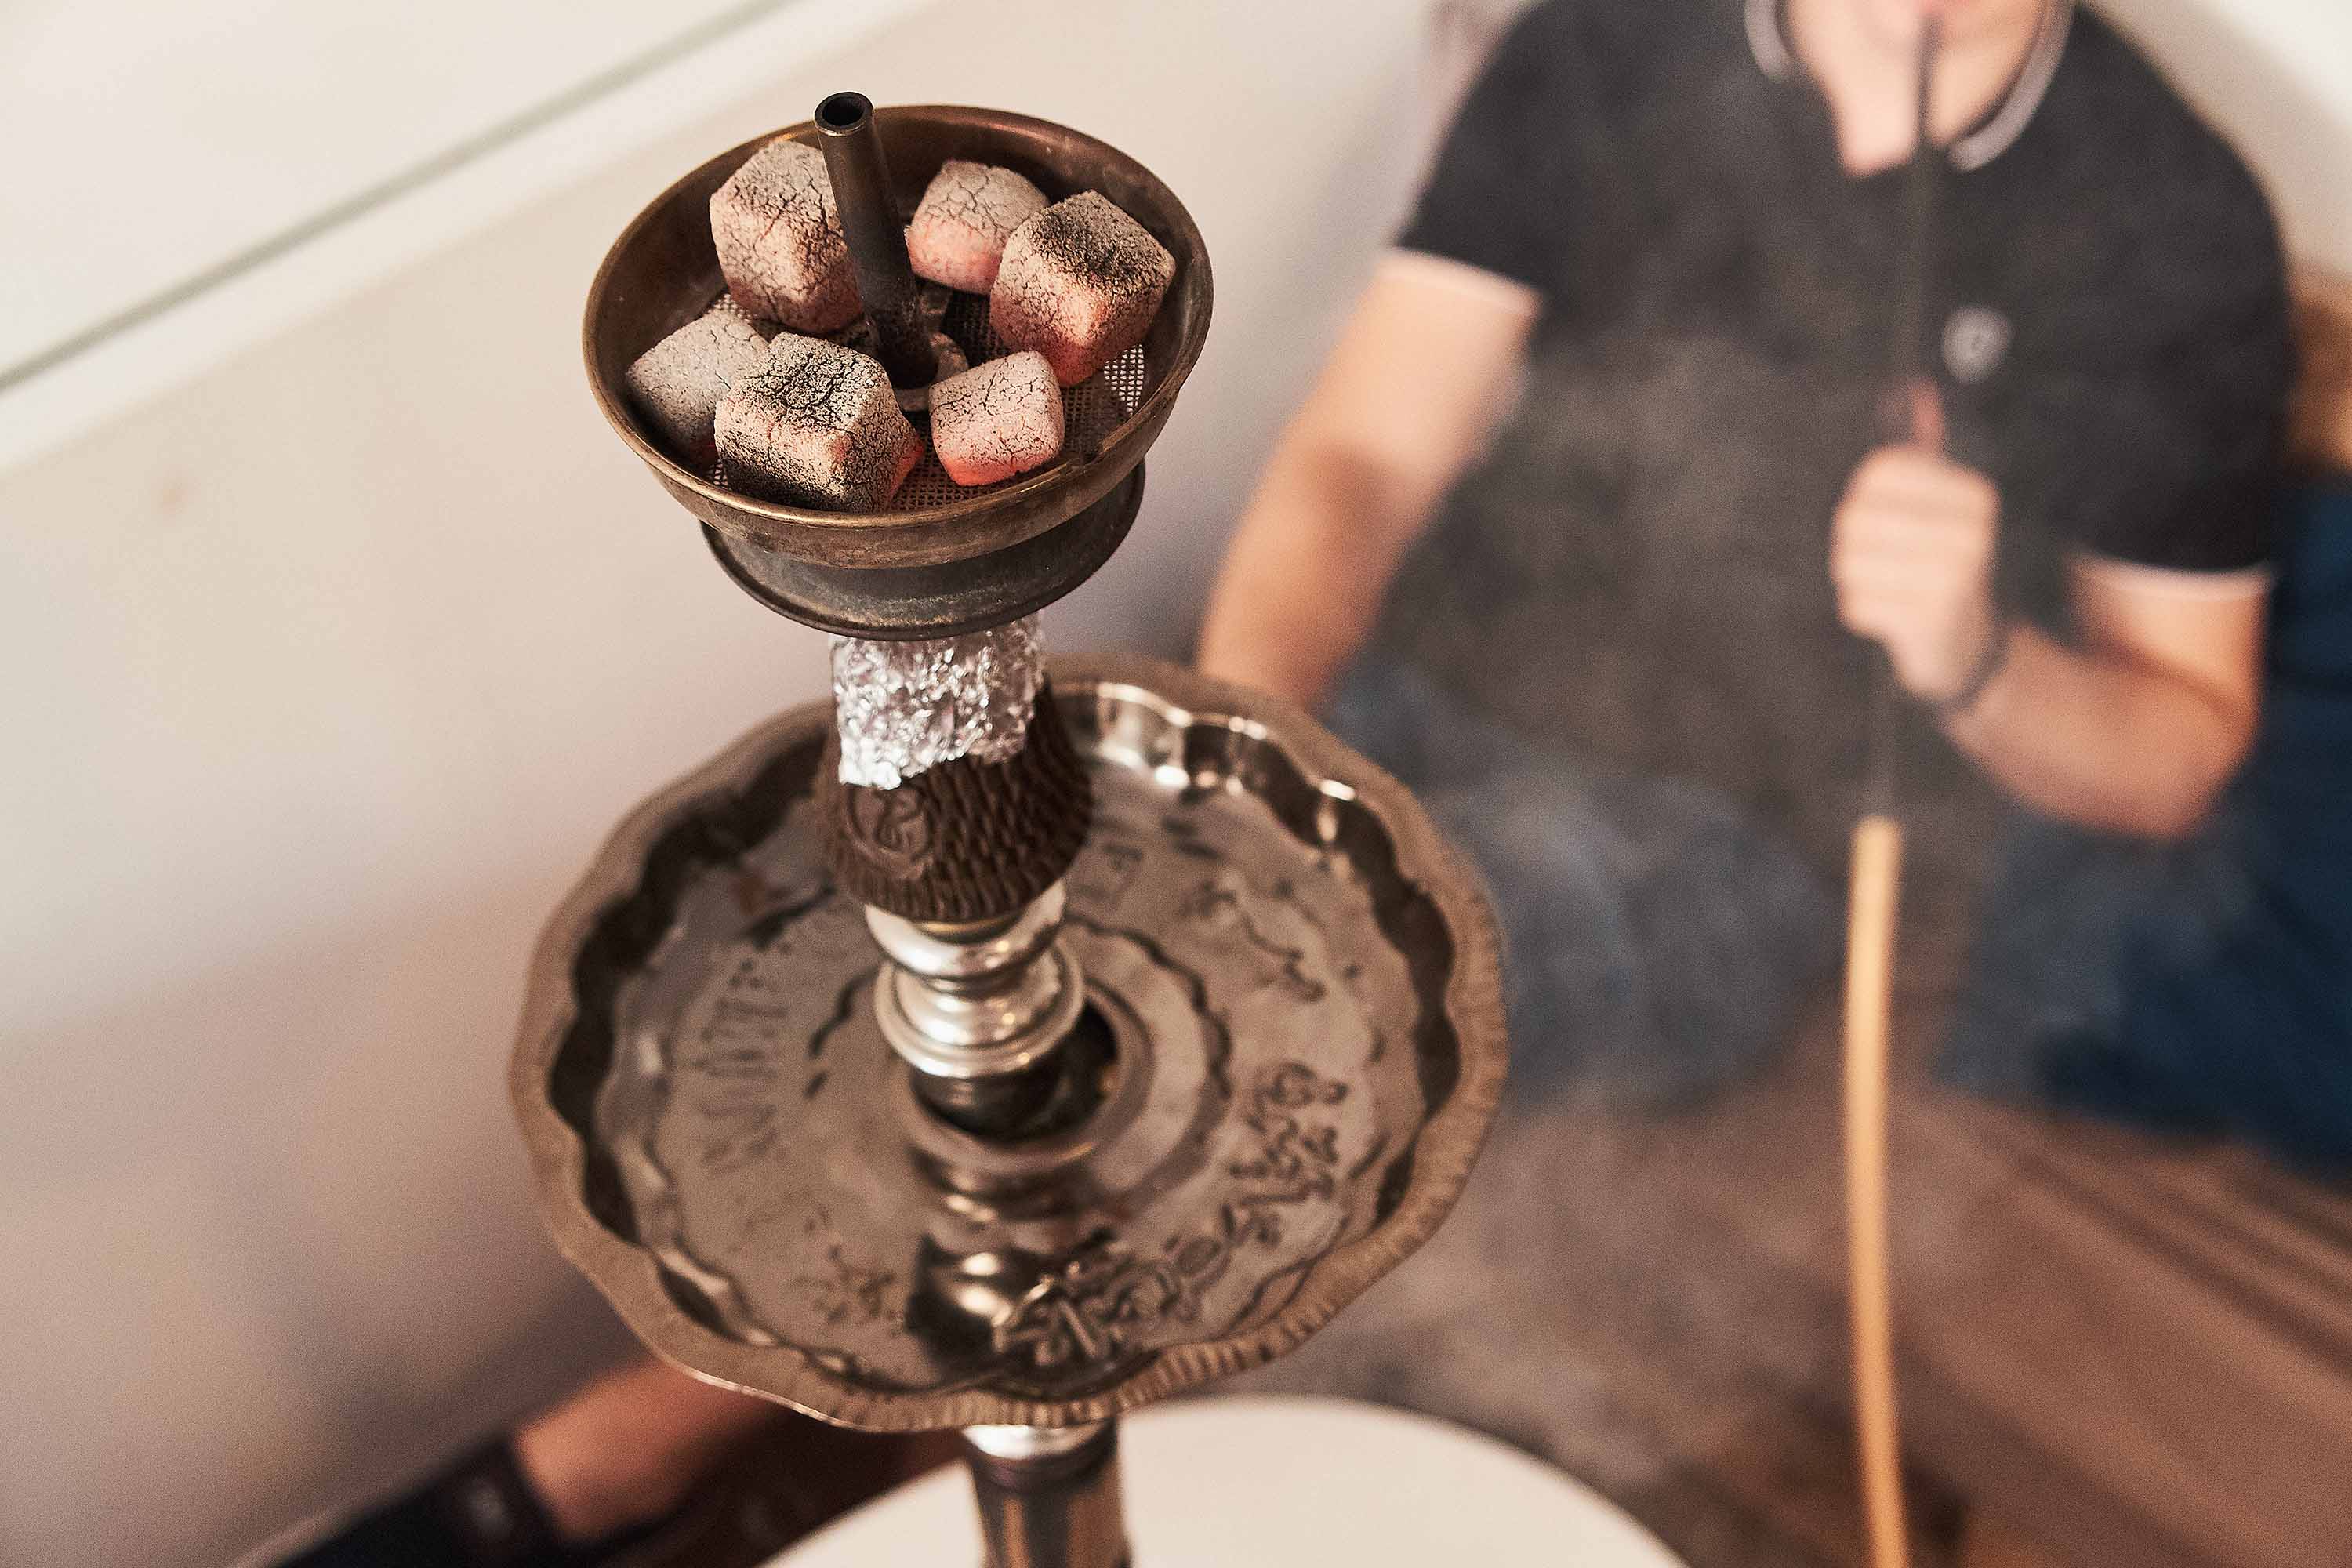 Hookah smokers inhale toxic chemicals that may harm the heart